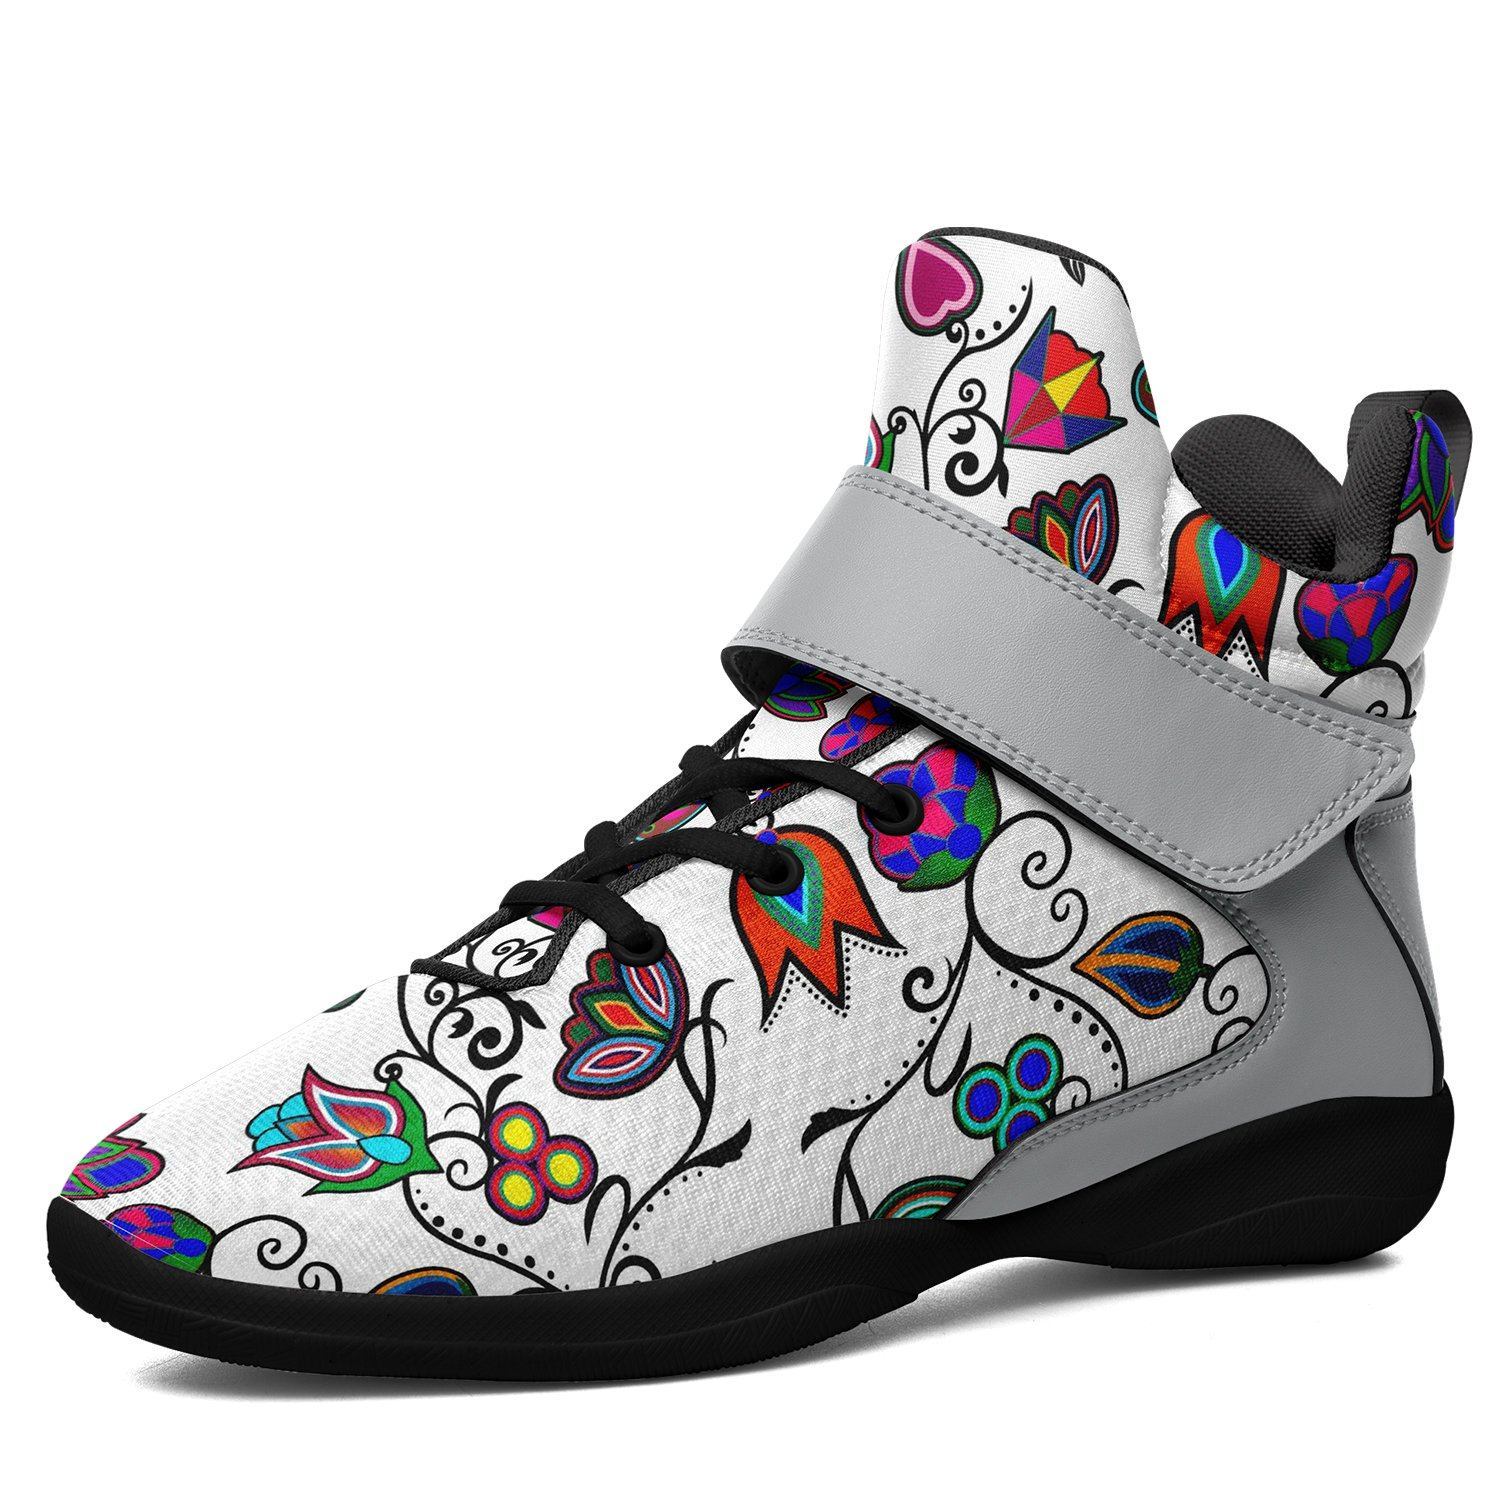 Indigenous Paisley White Ipottaa Basketball / Sport High Top Shoes - Black Sole 49 Dzine US Men 7 / EUR 40 Black Sole with Gray Strap 